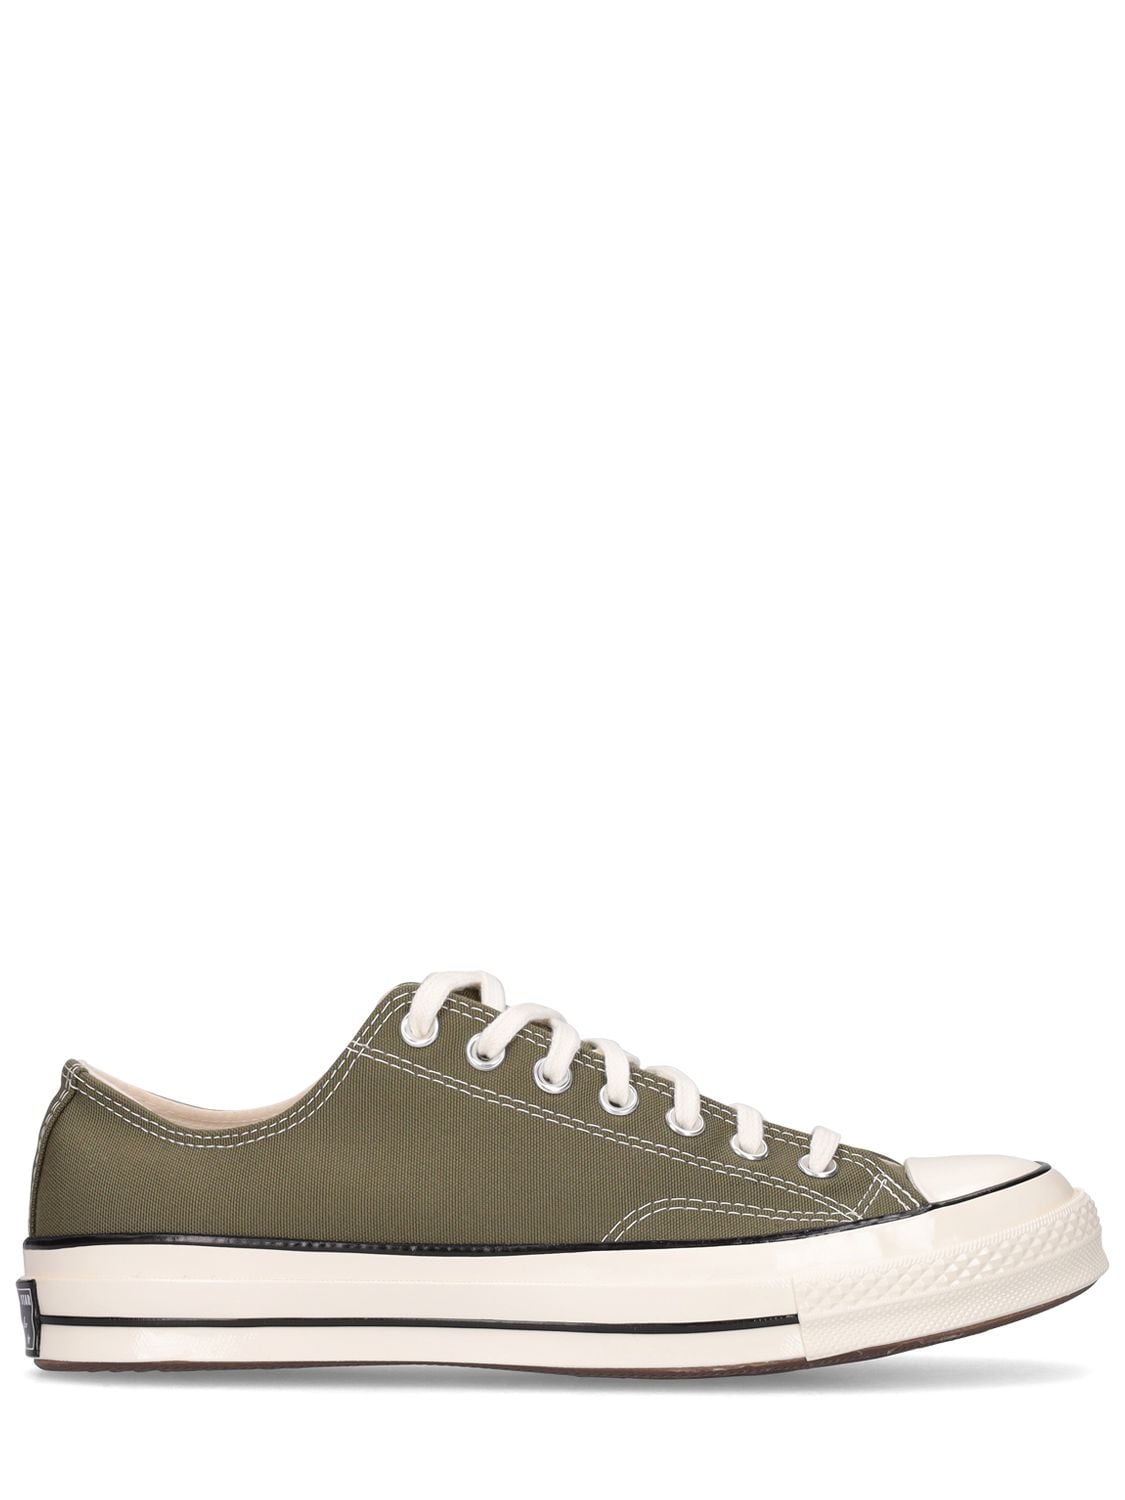 CONVERSE CHUCK 70 OX LOW SNEAKERS